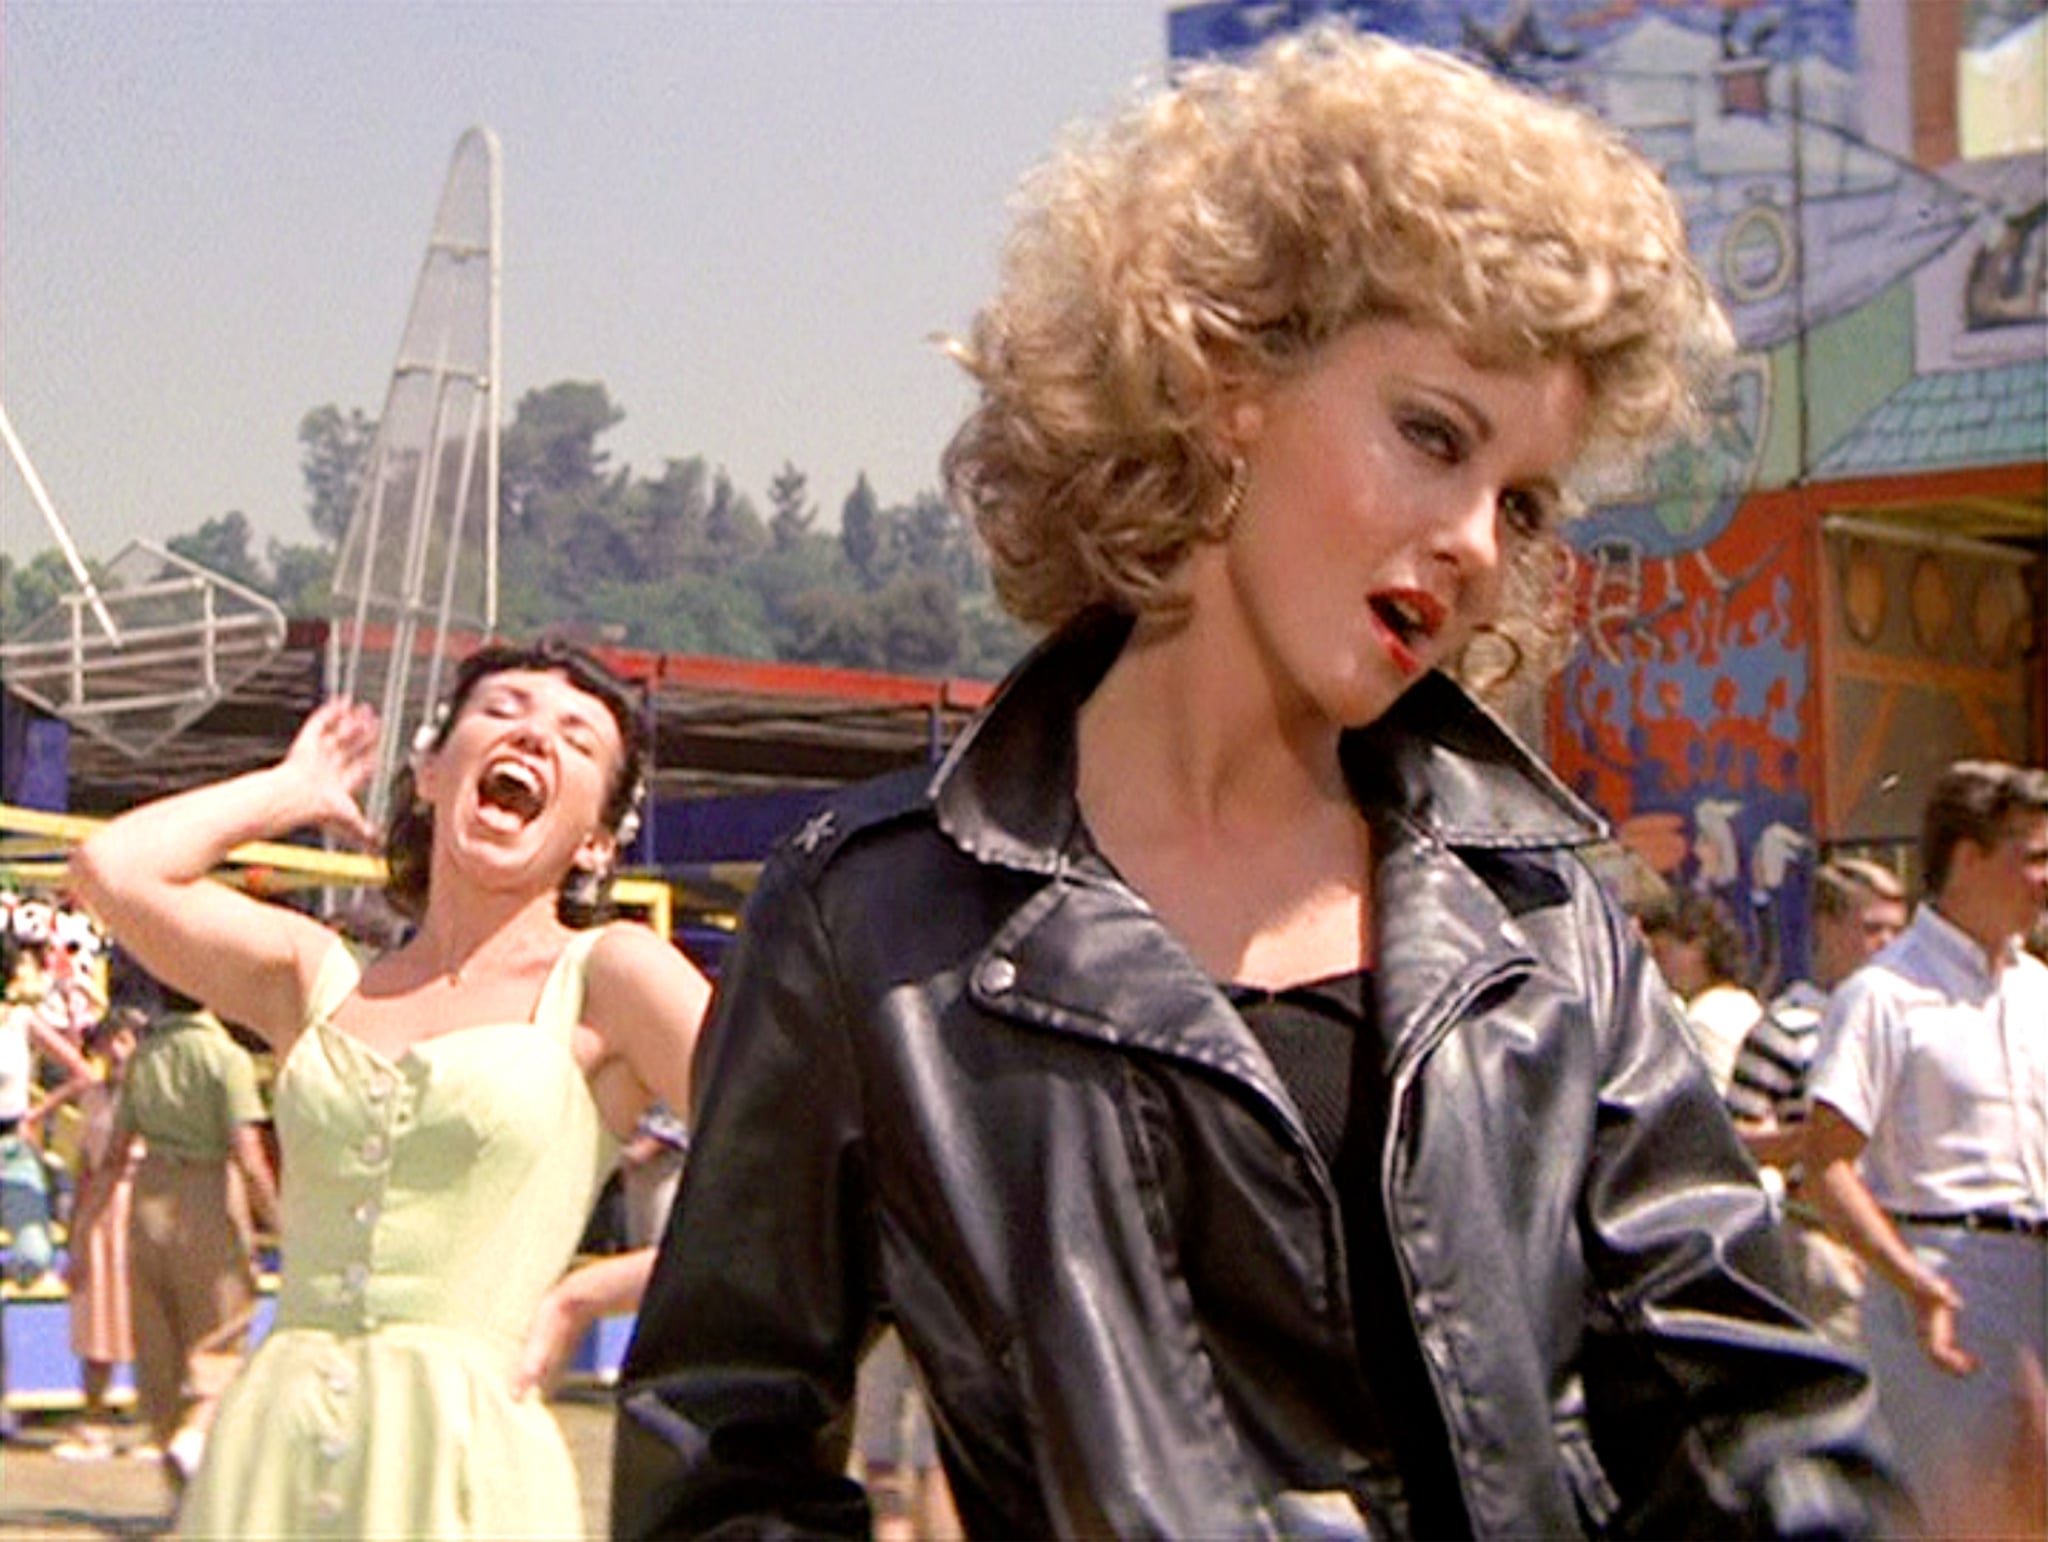 7. Sandy from Grease Costume - wide 2